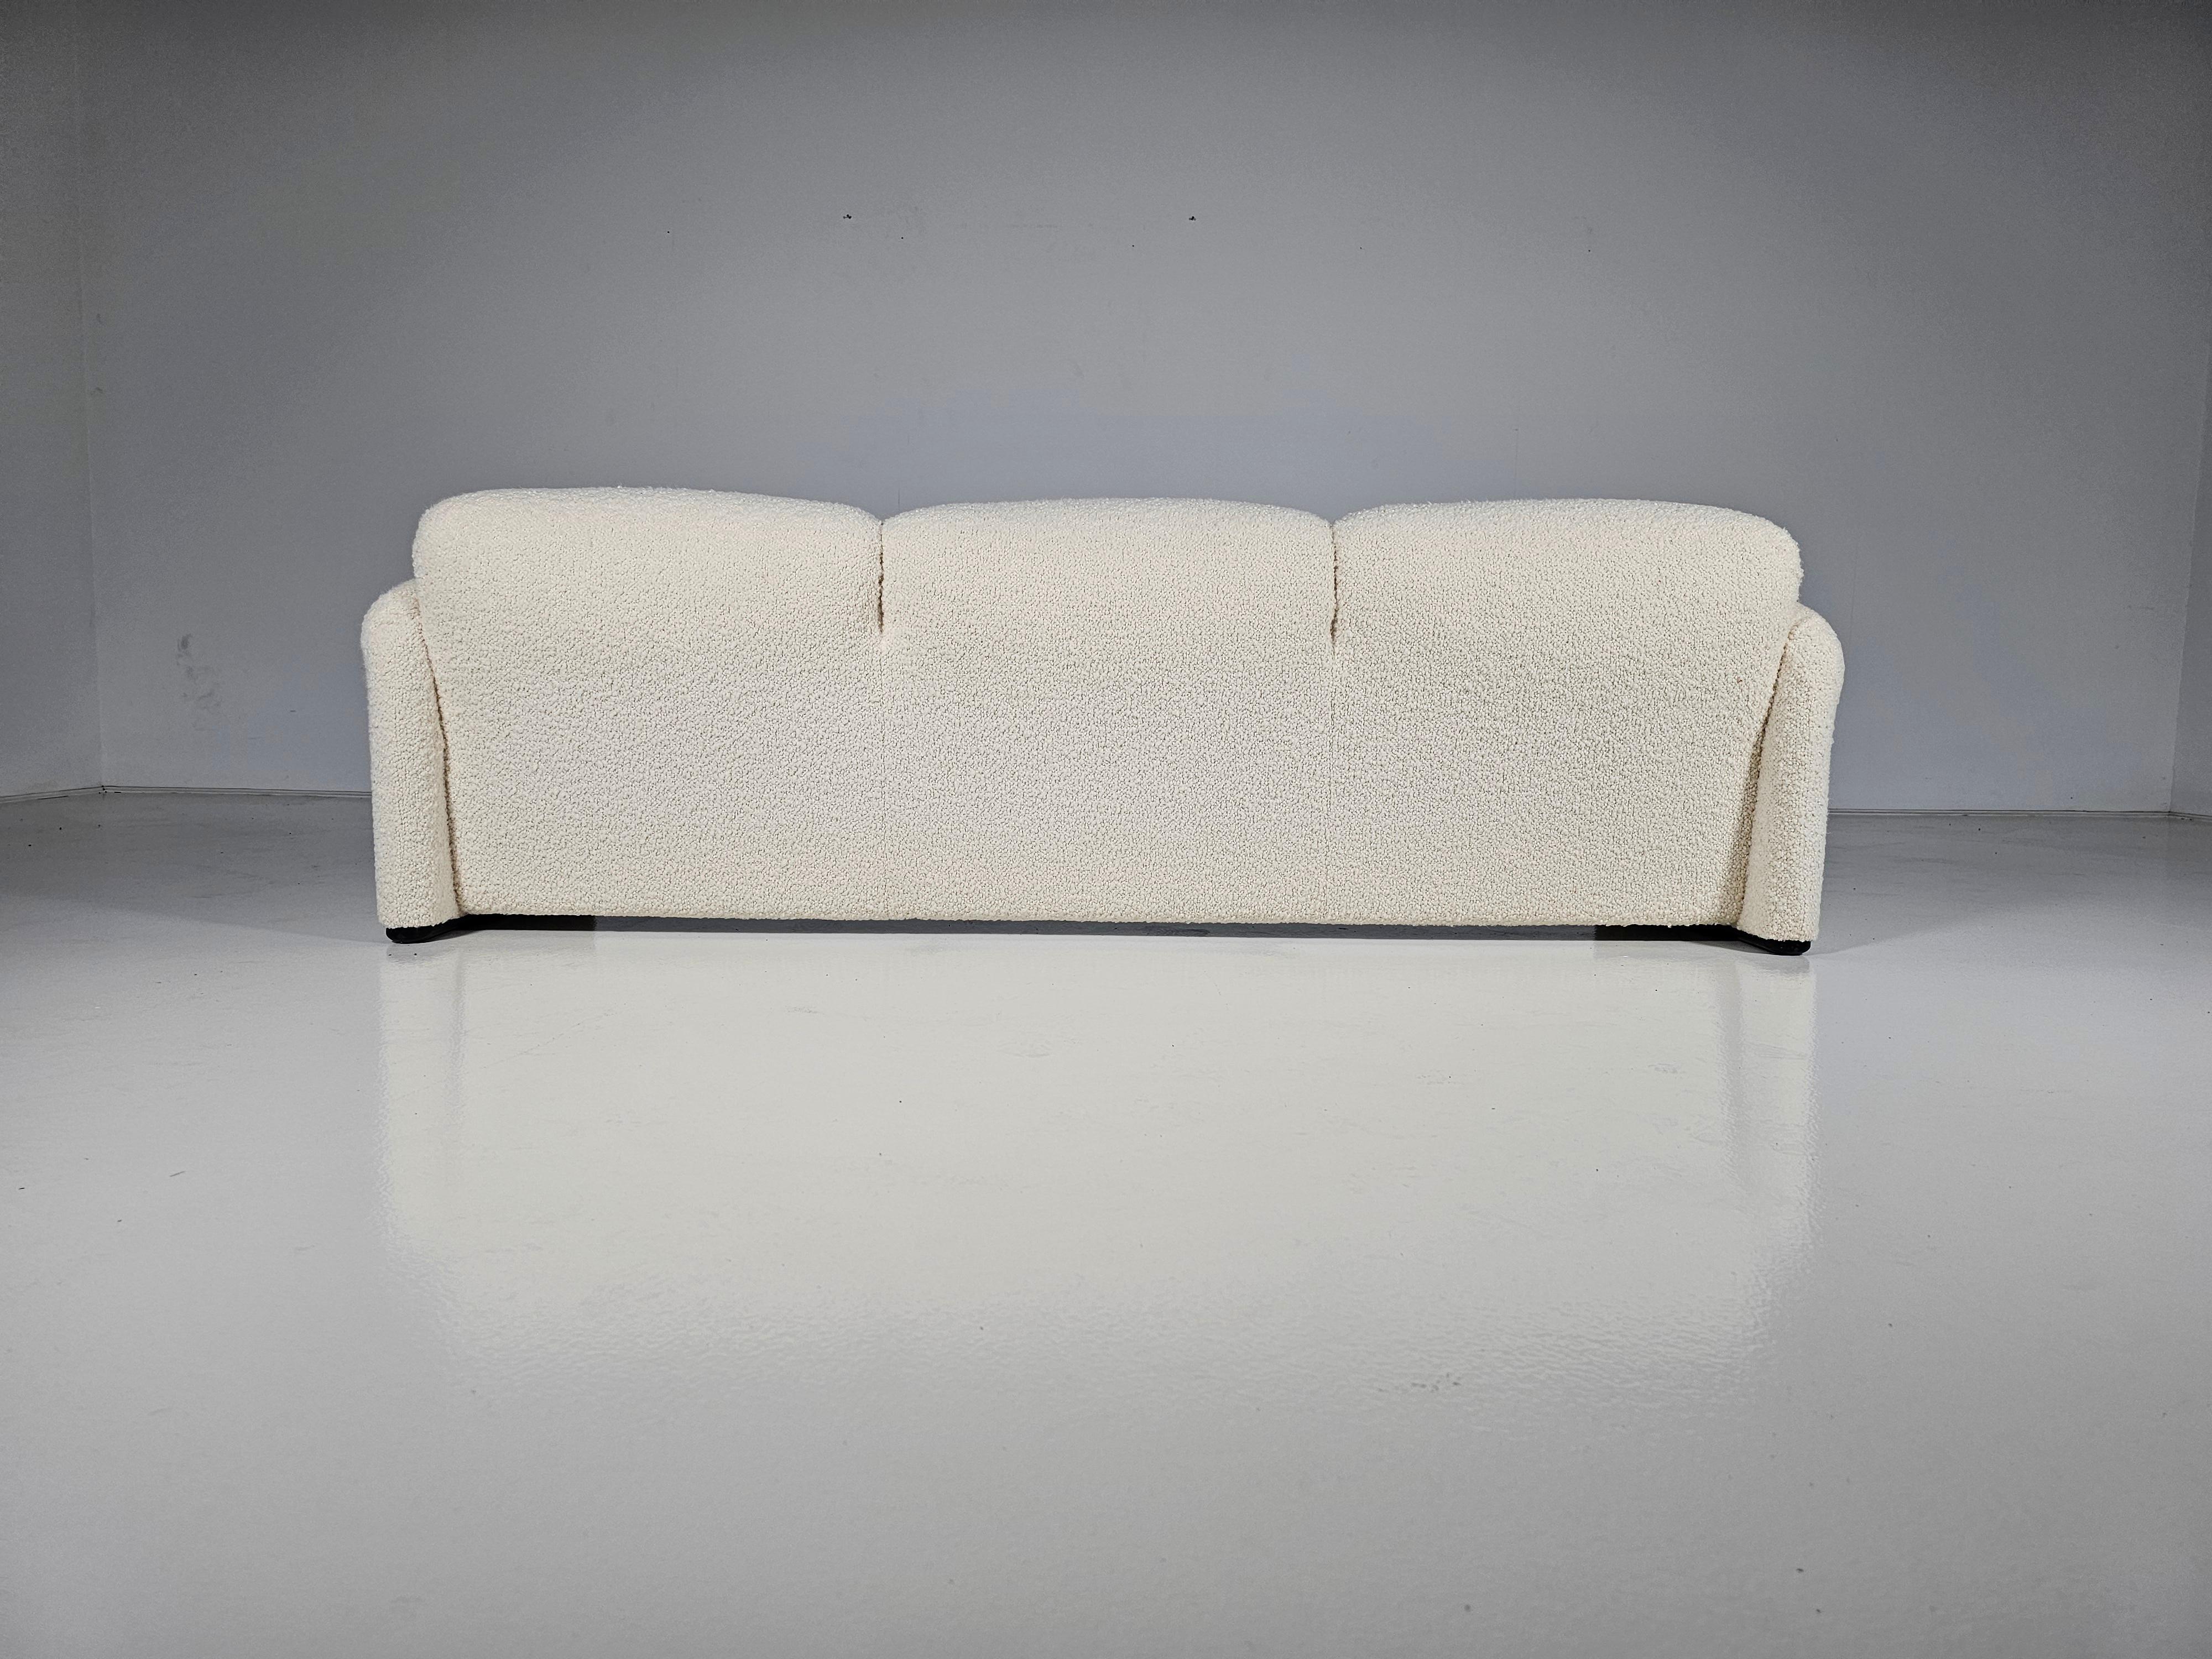 Late 20th Century Maralunga 3-seater in cream boucle by Vico Magistretti for Cassina, 1970s For Sale